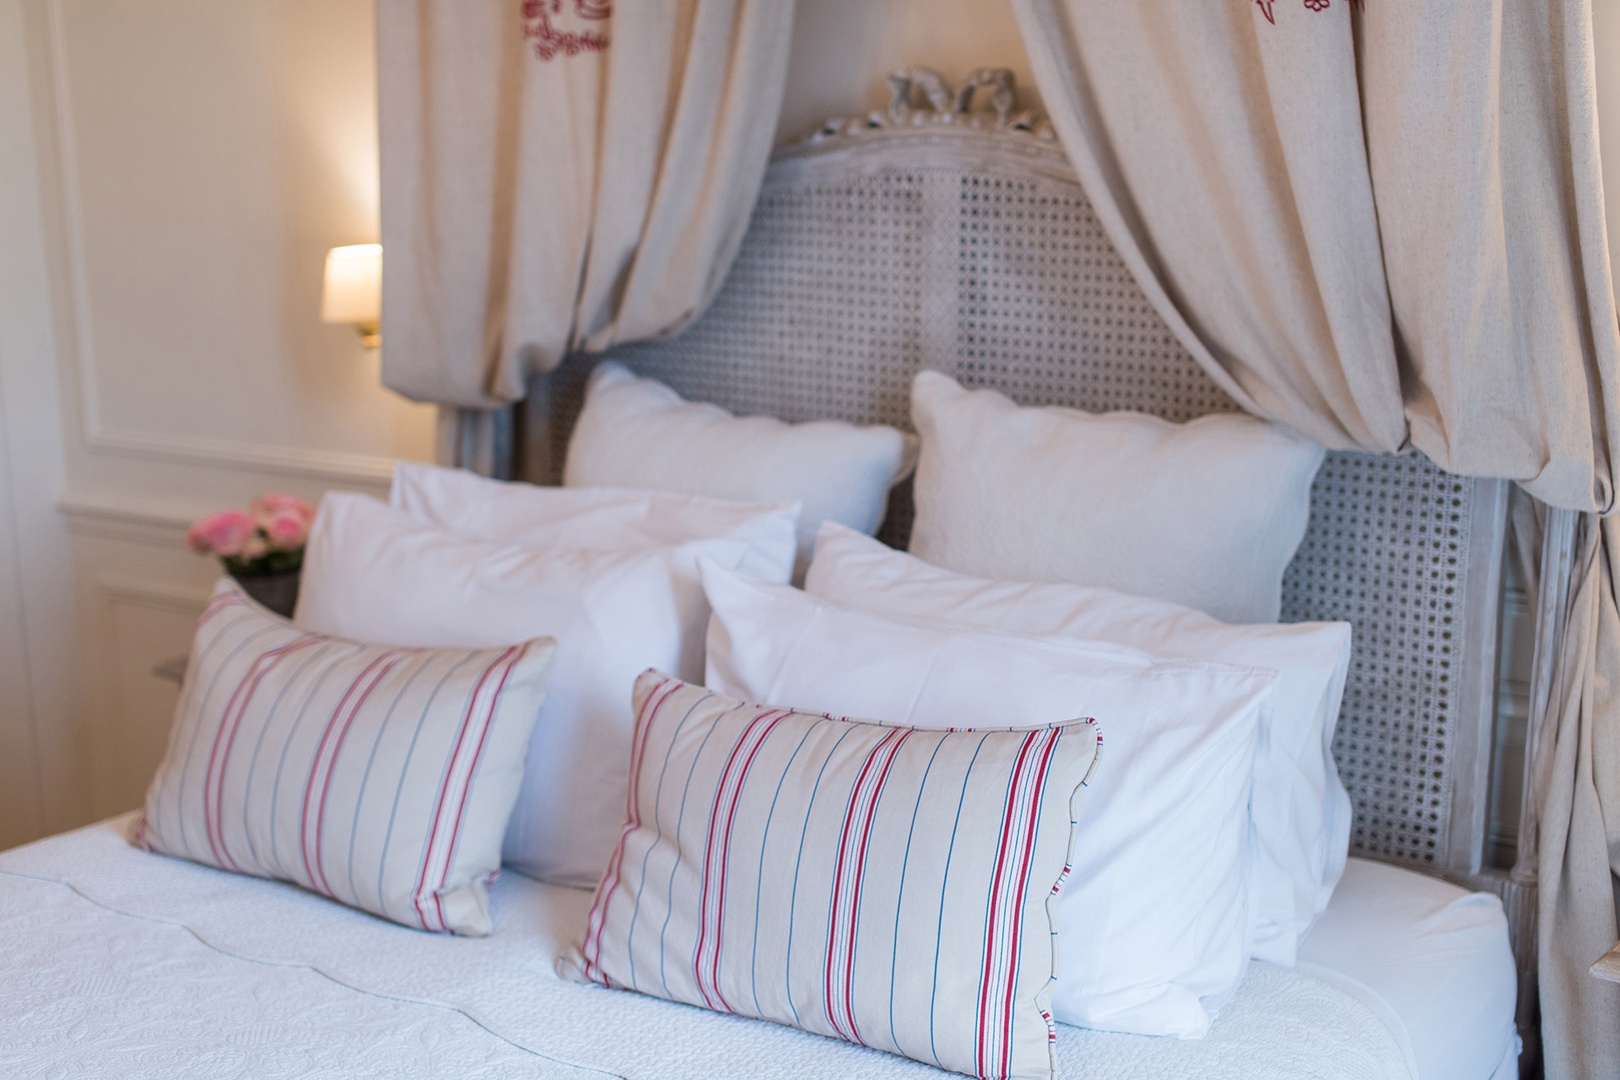 Sink into the luxurious bedding and get a good night's sleep.